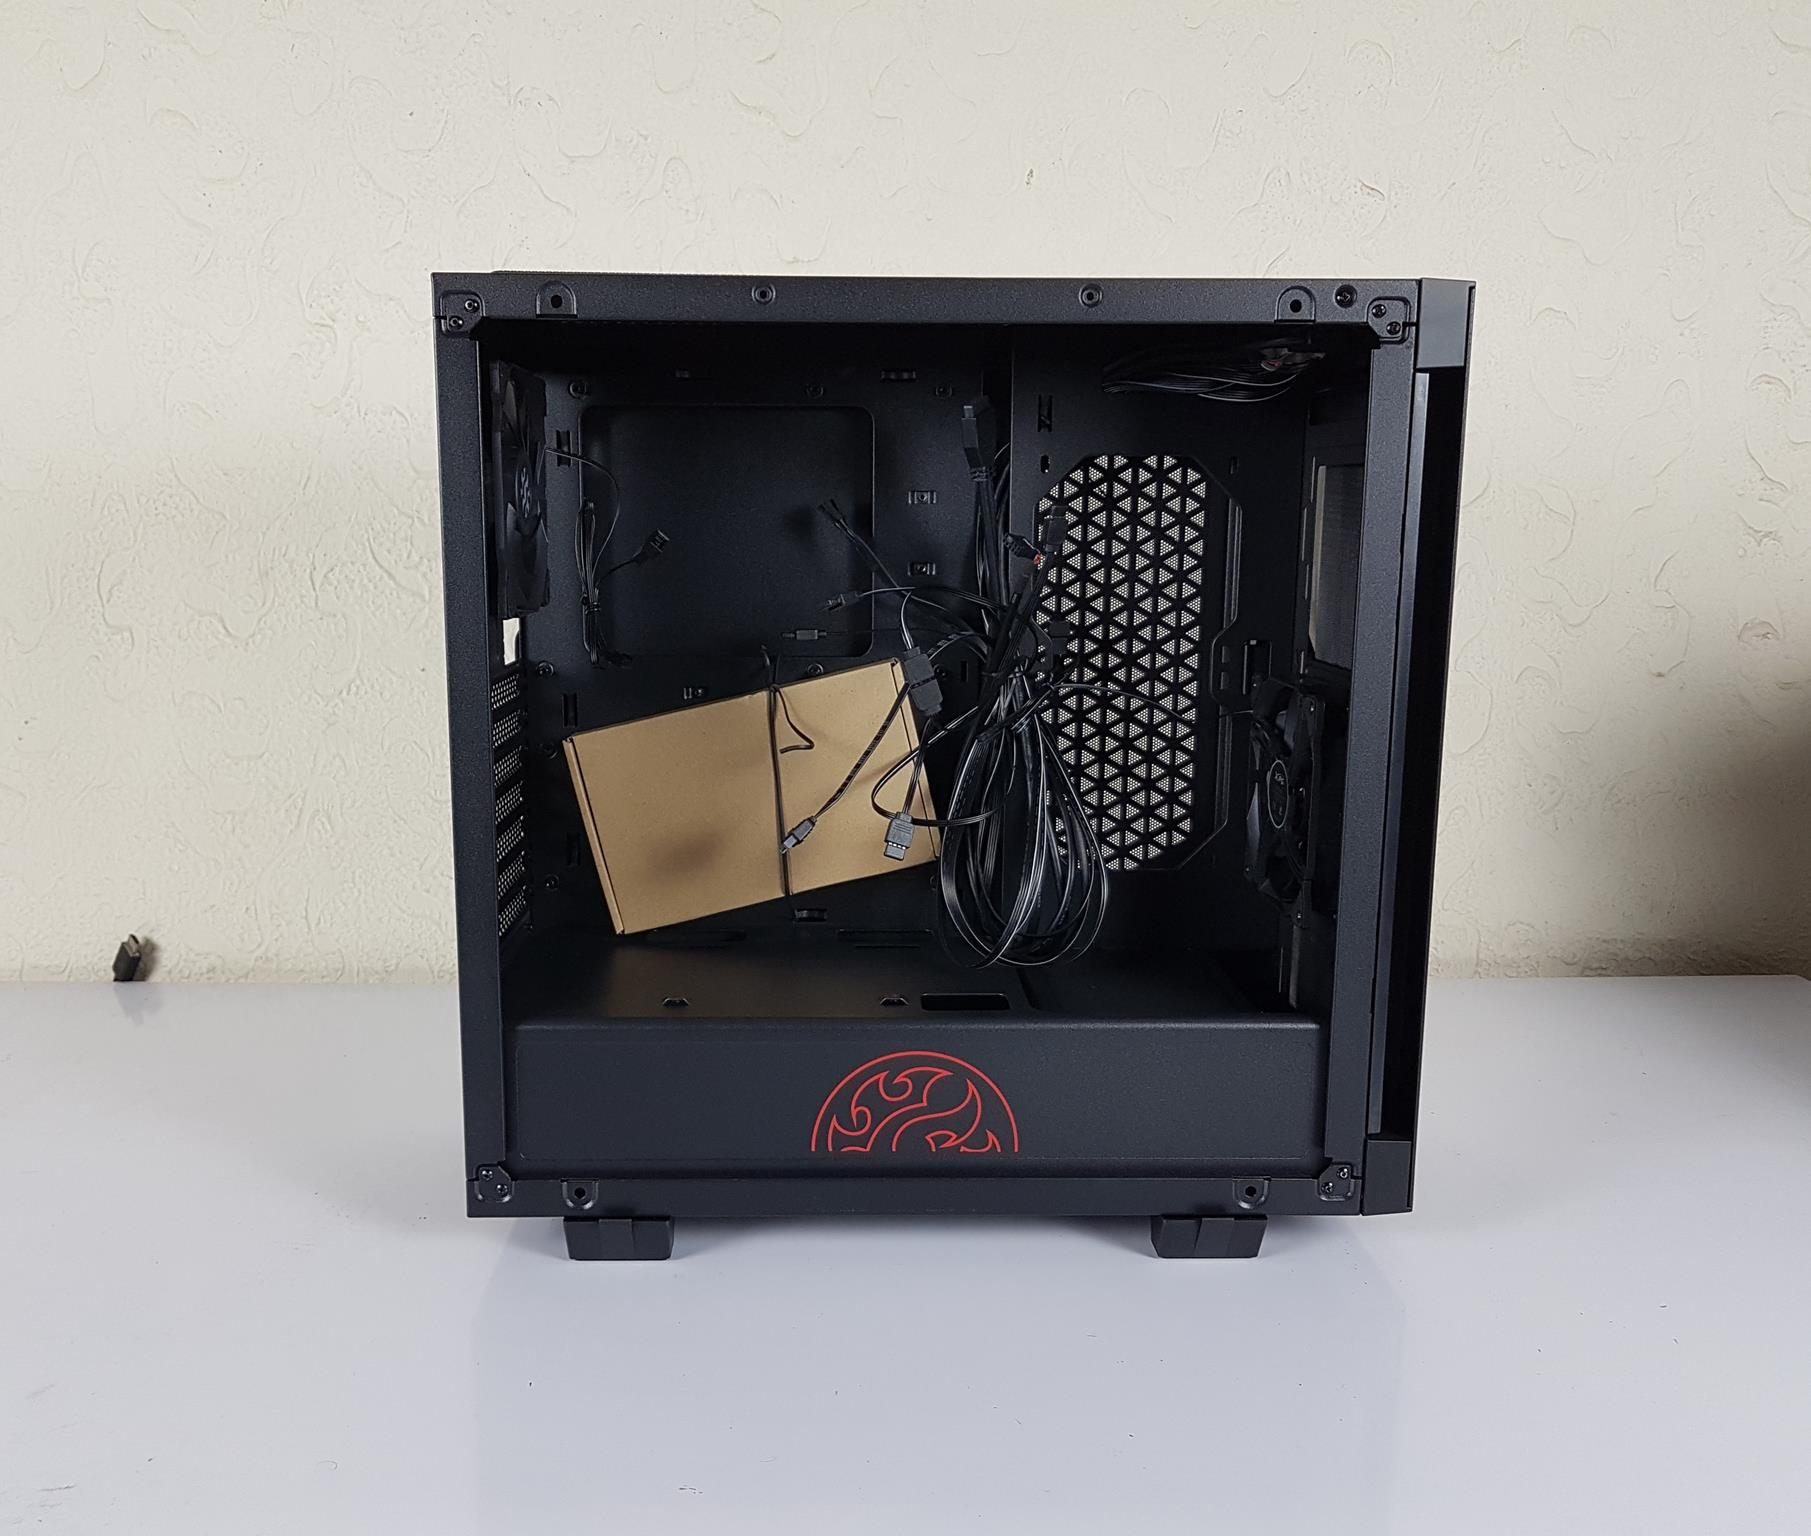 adata xpg invader tempered glass gaming chassis